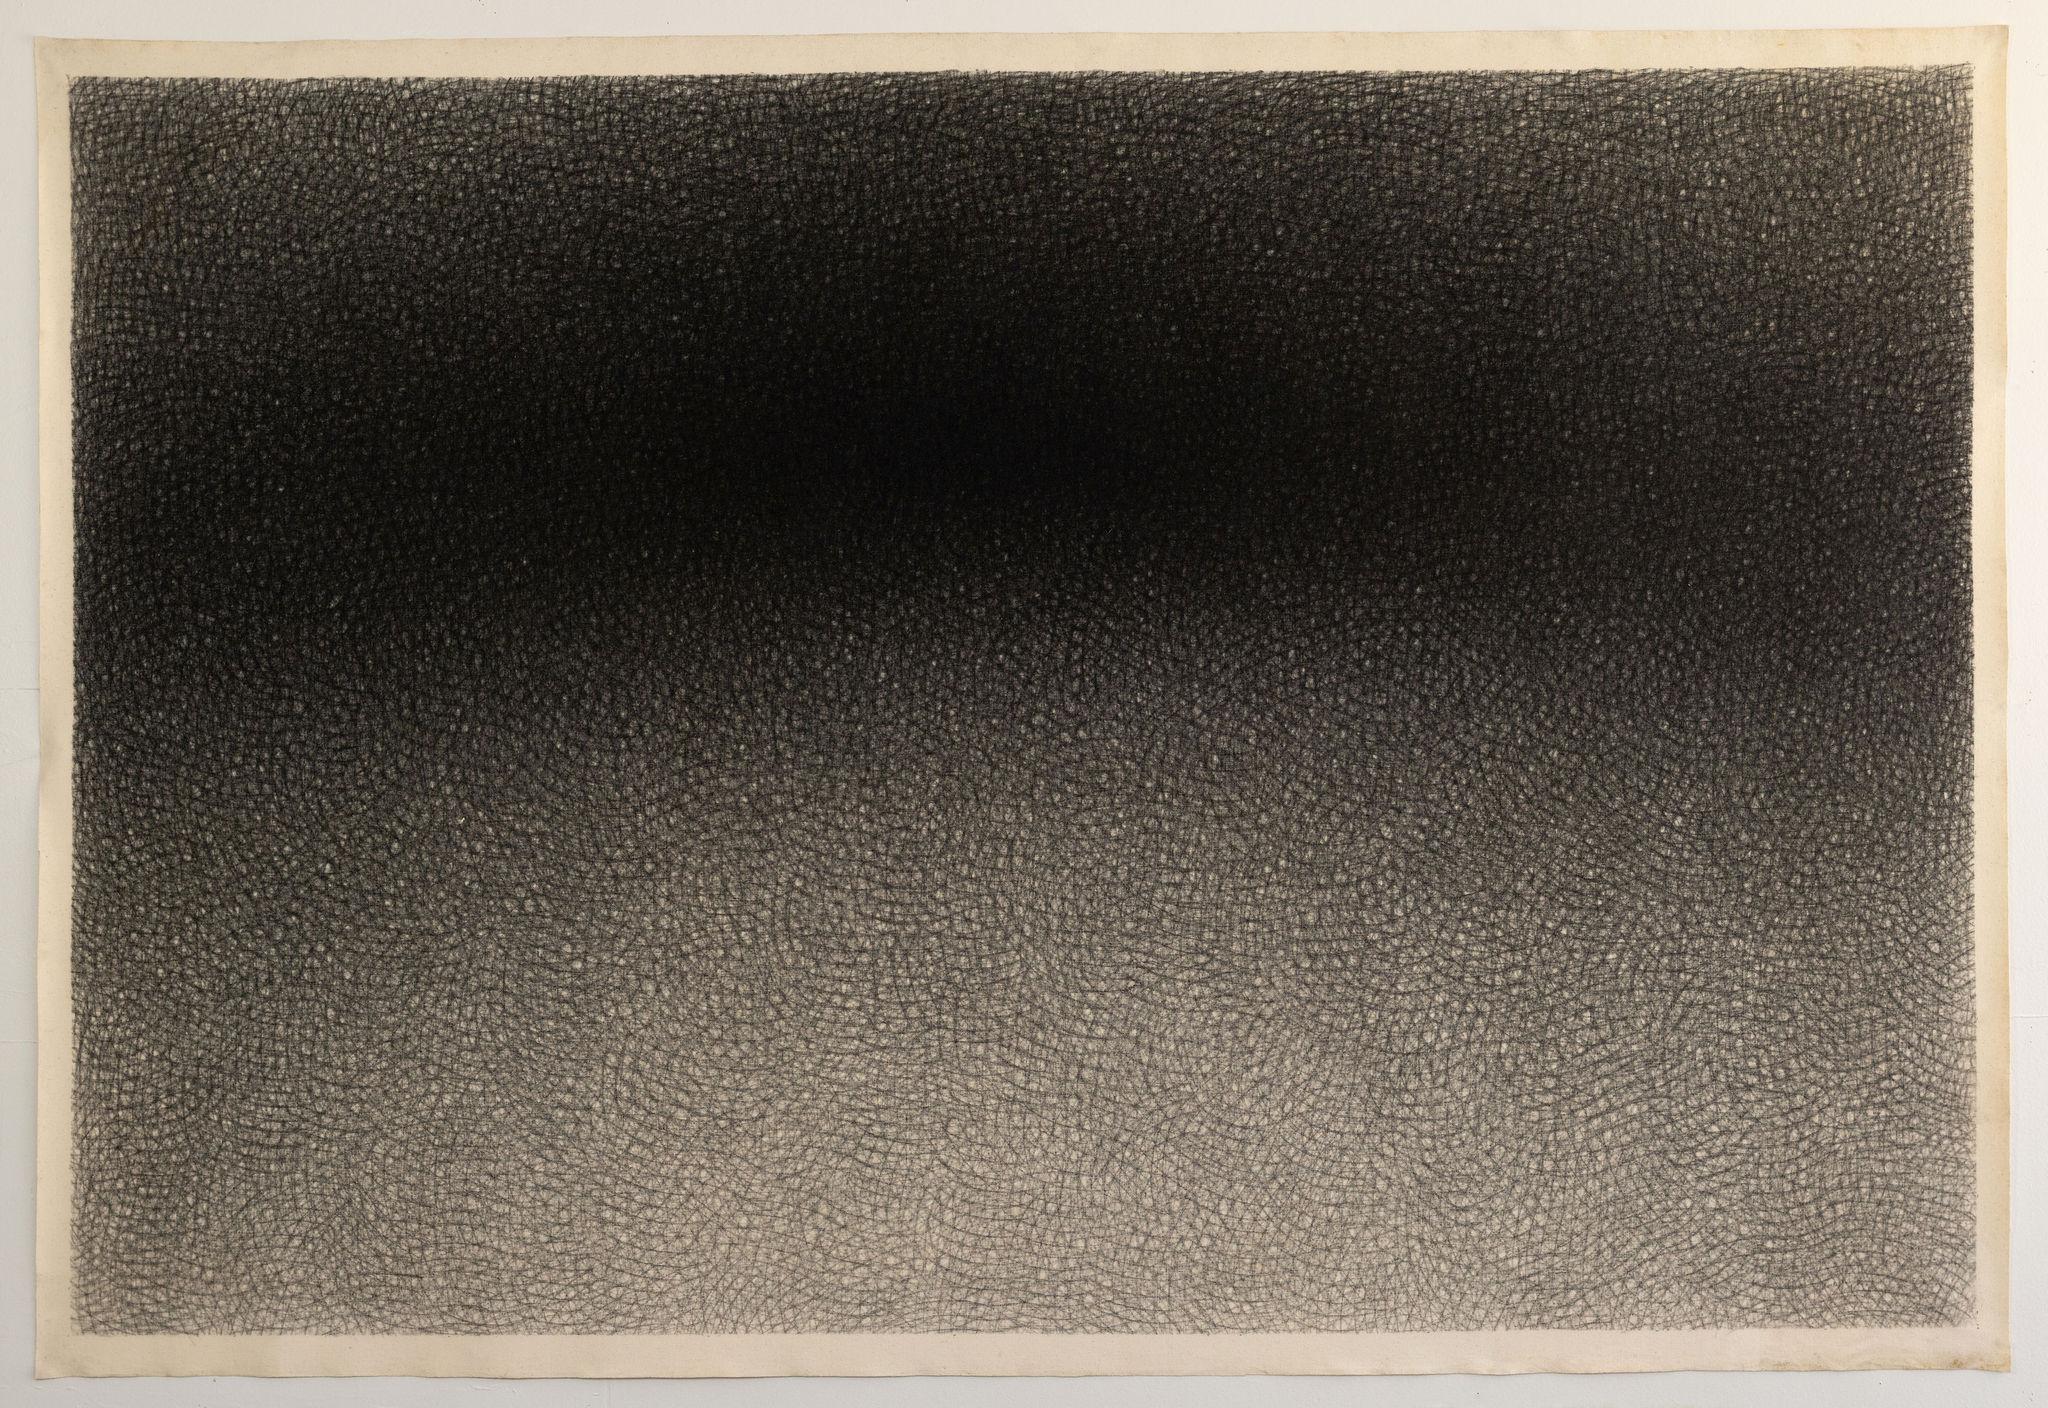 Jack Scott
"Black Arc, High Arc"
4/1976
Charcoal on unprimed canvas sprayed with custom fixative
90.25"x60" unstretched
Signed, titled and dated in pencil on reverse

This canvas is a testament to the artist's meticulous craftsmanship and creative